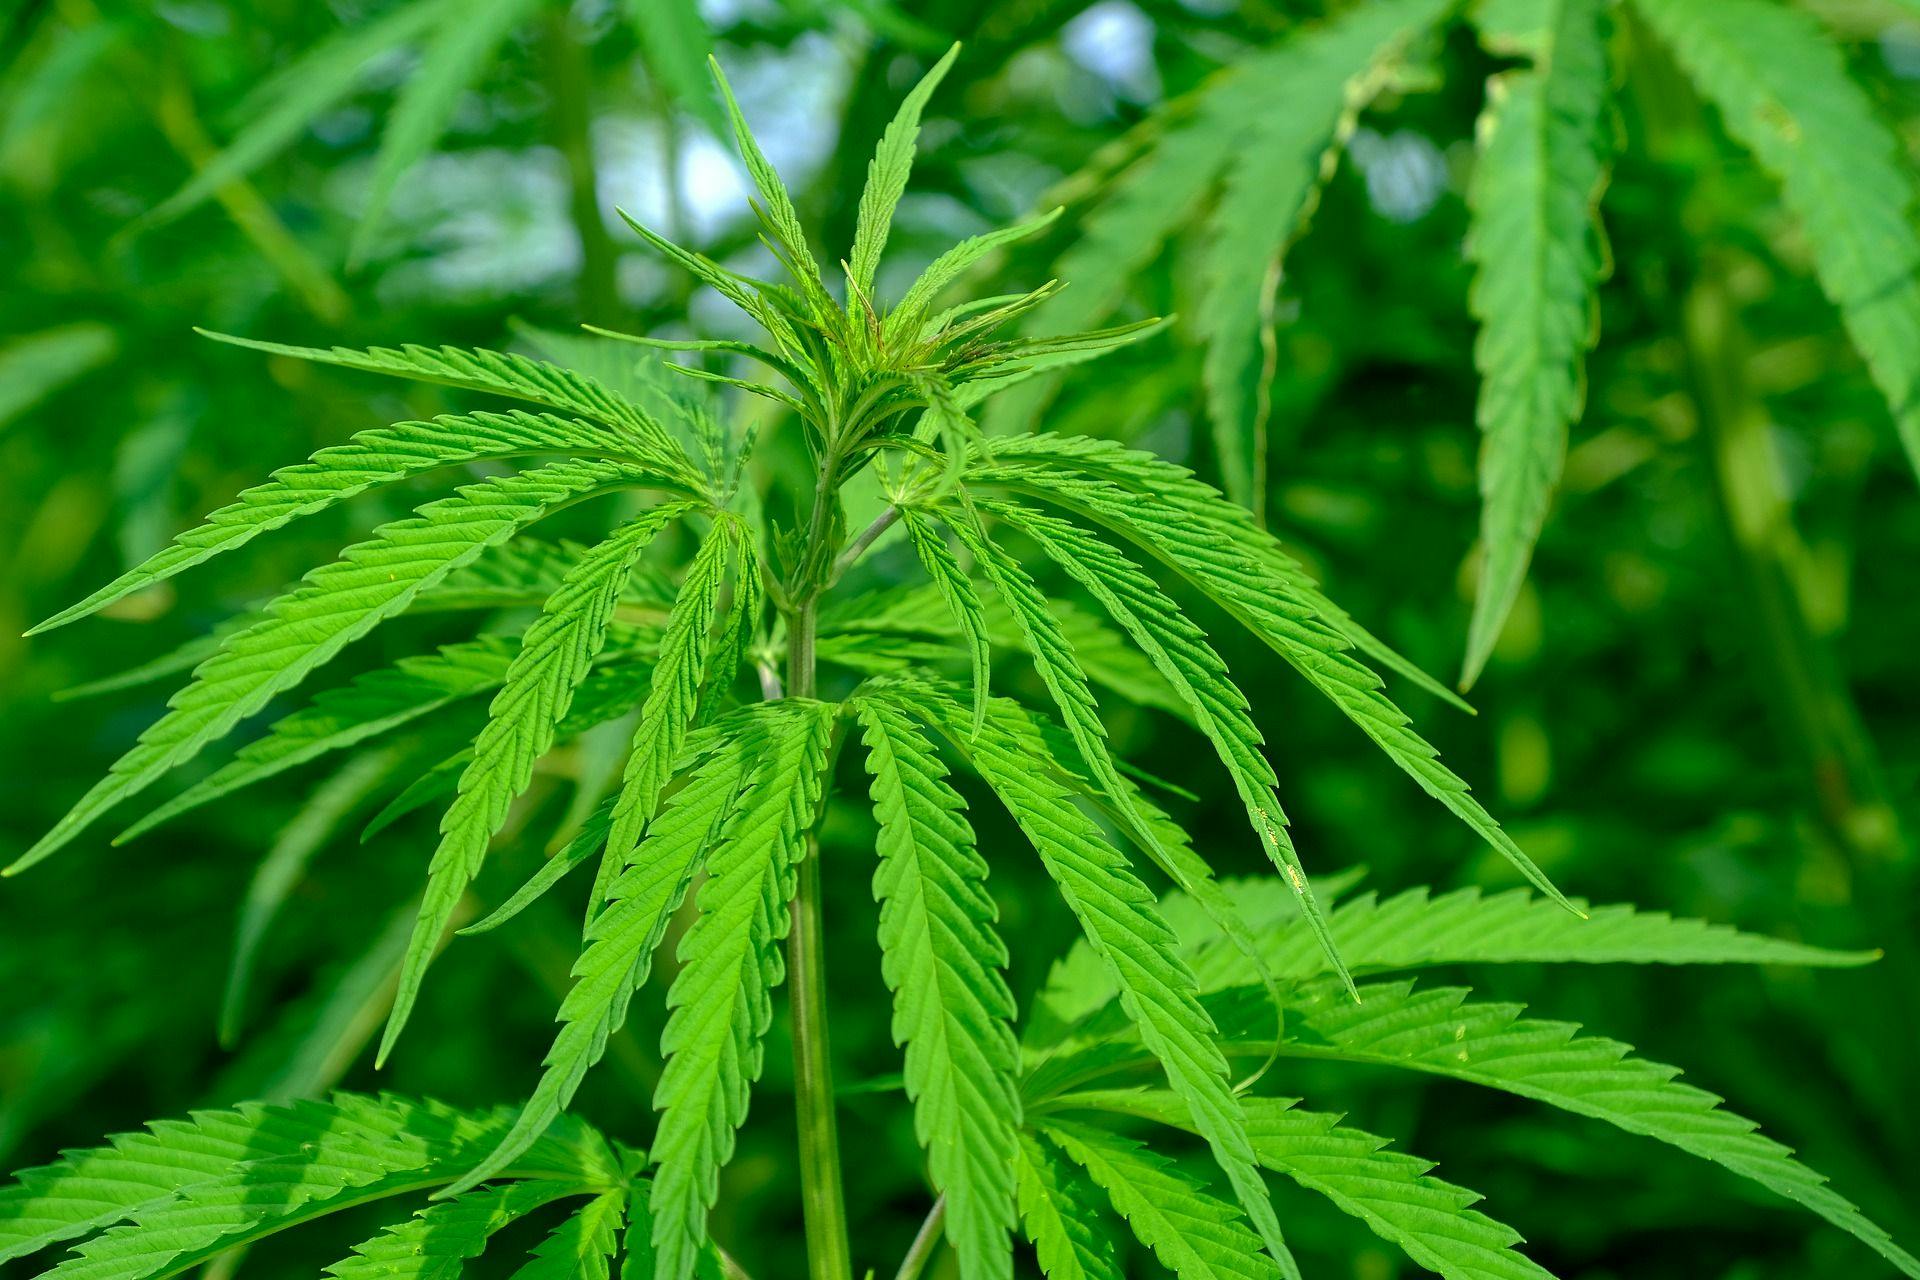 Pot or Not: An Overview of Hemp- and CBD-Containing Products